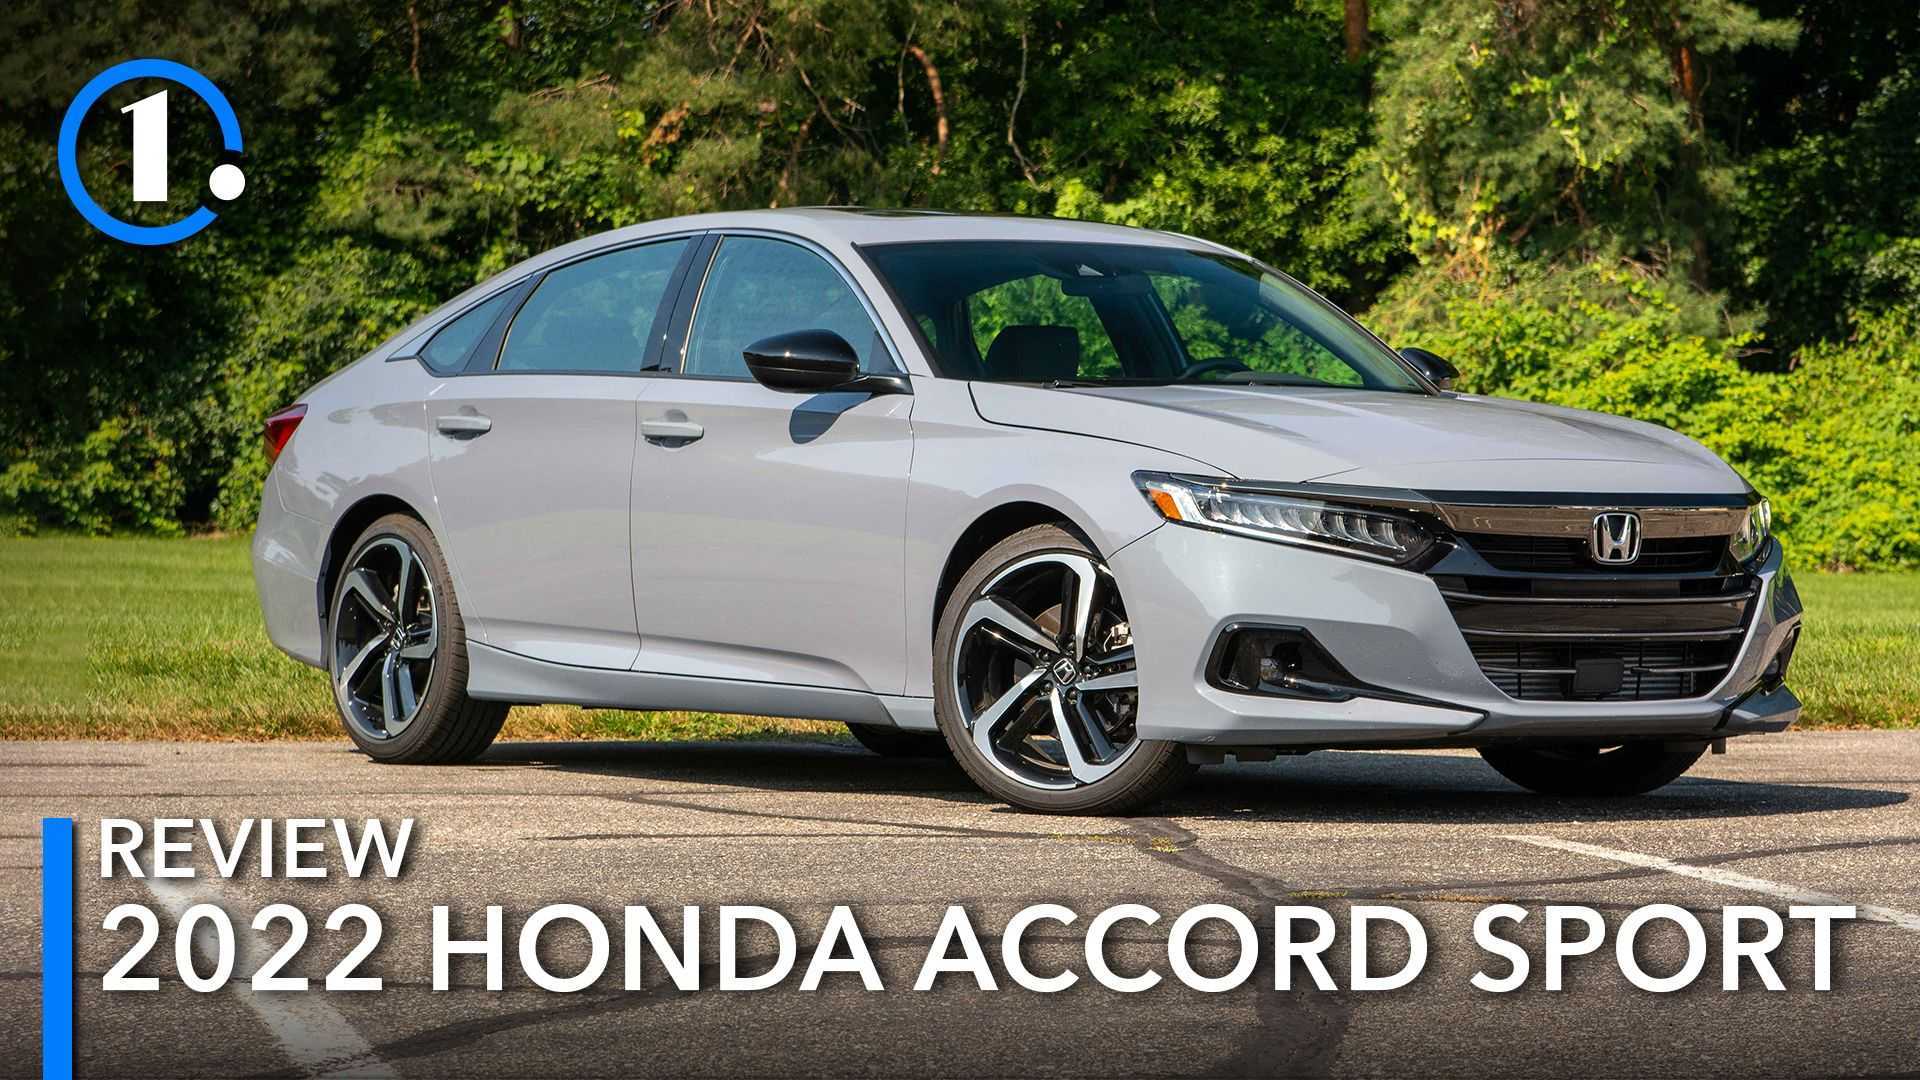 2022 Honda Accord Sport Review: Power To The People